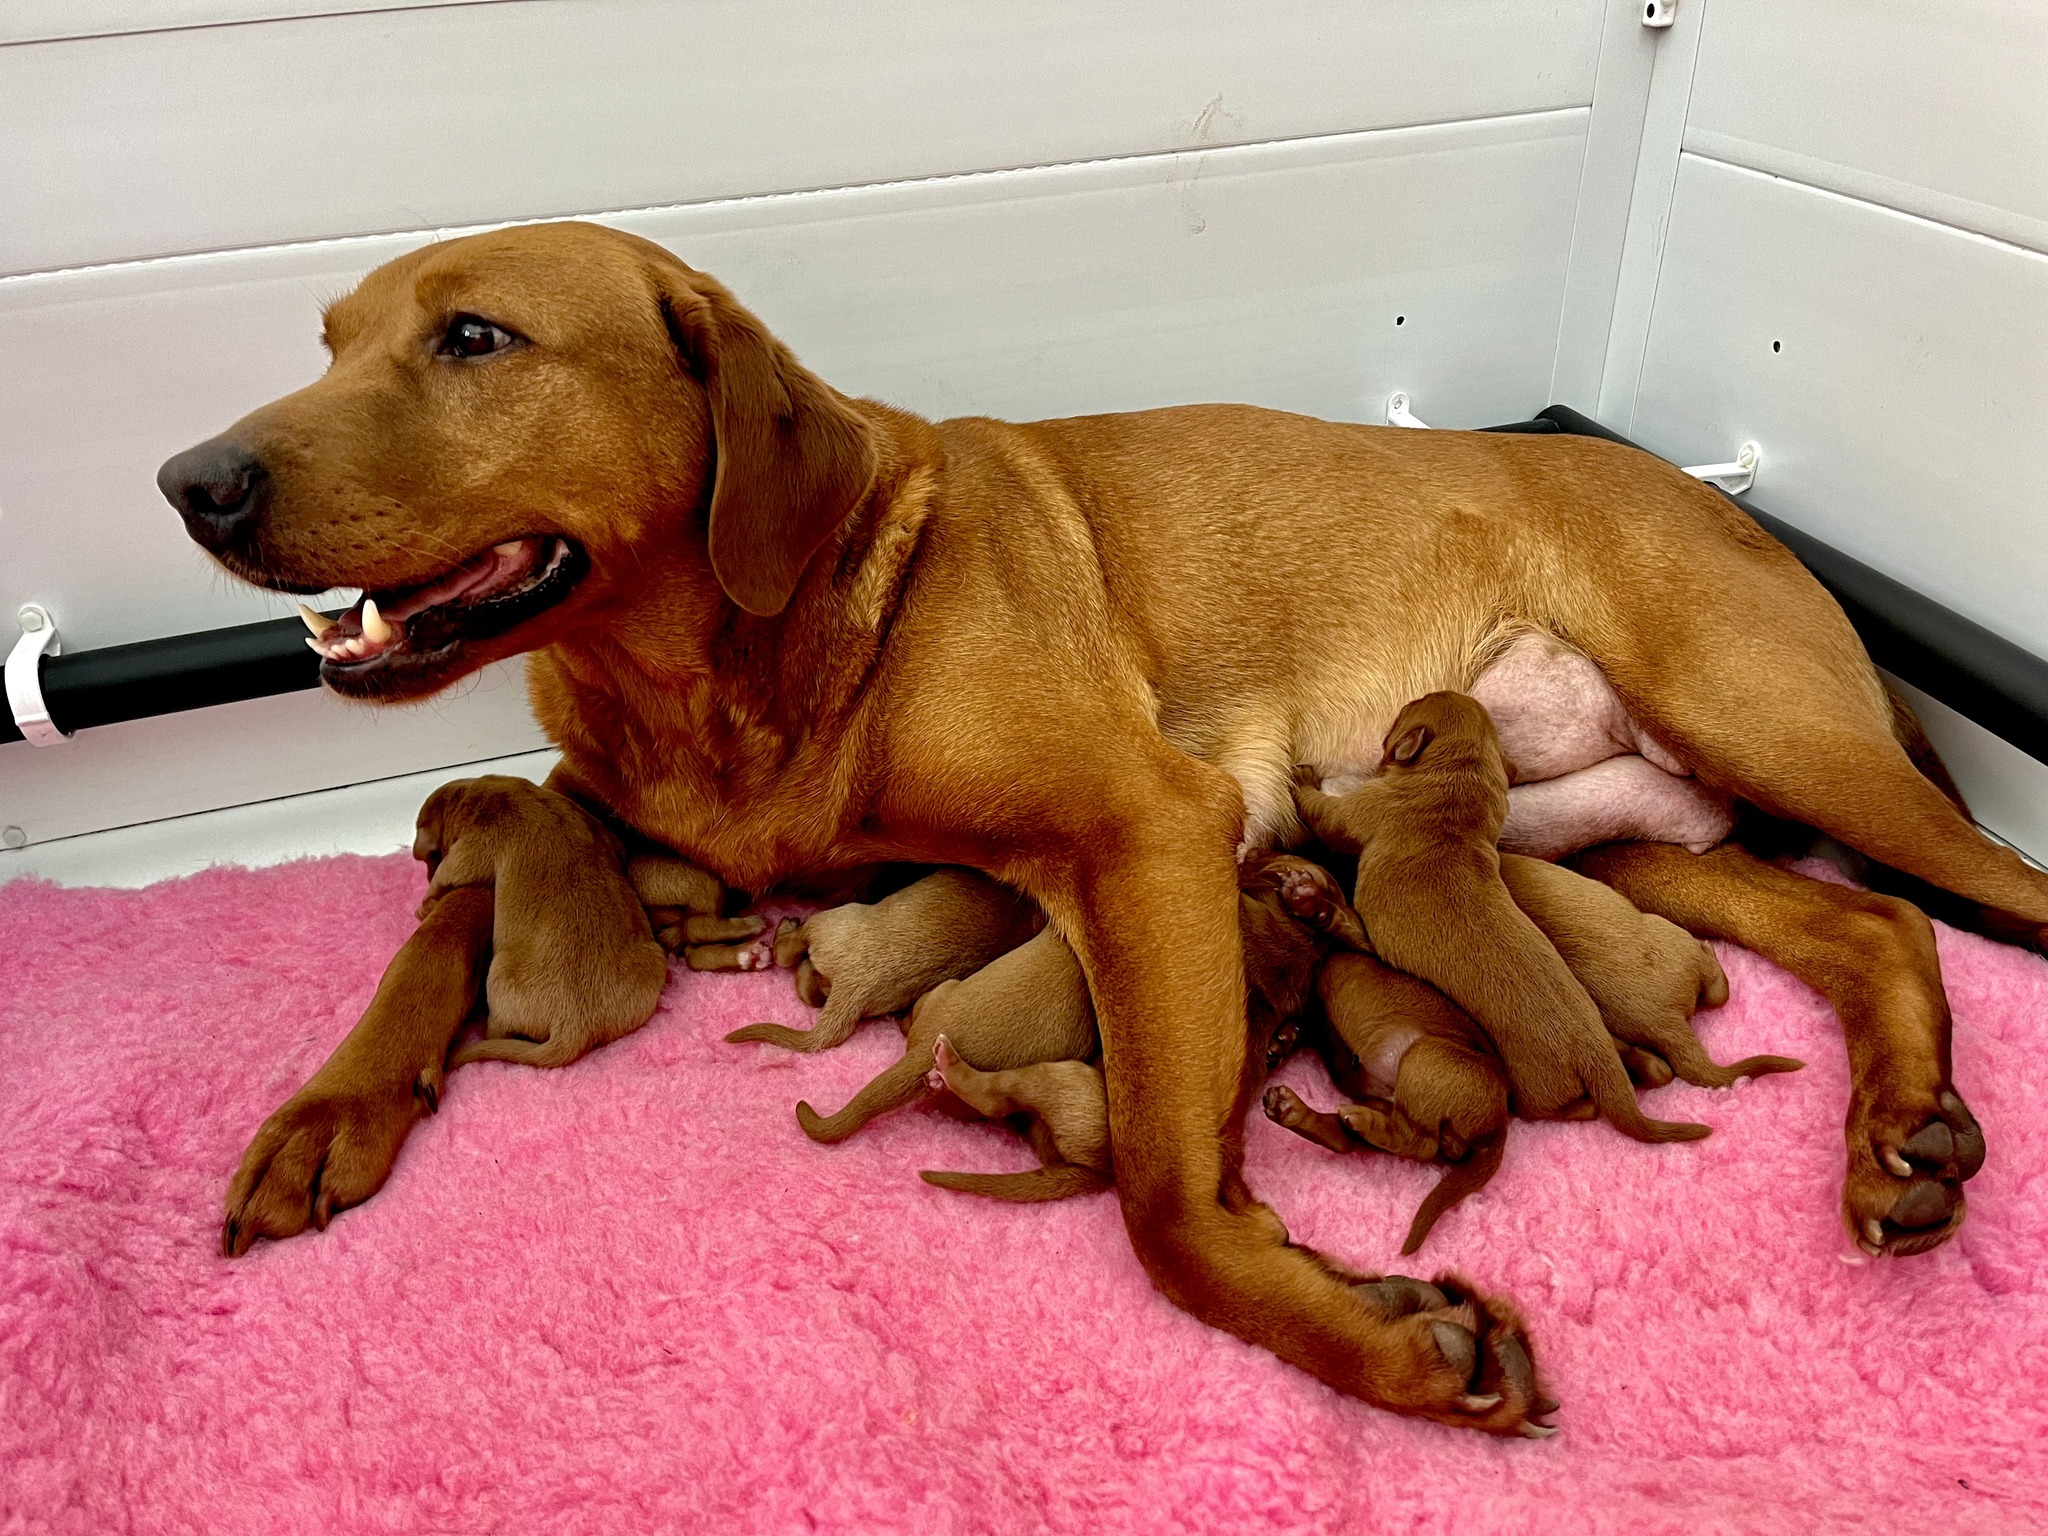 A proud mum with her special litter.